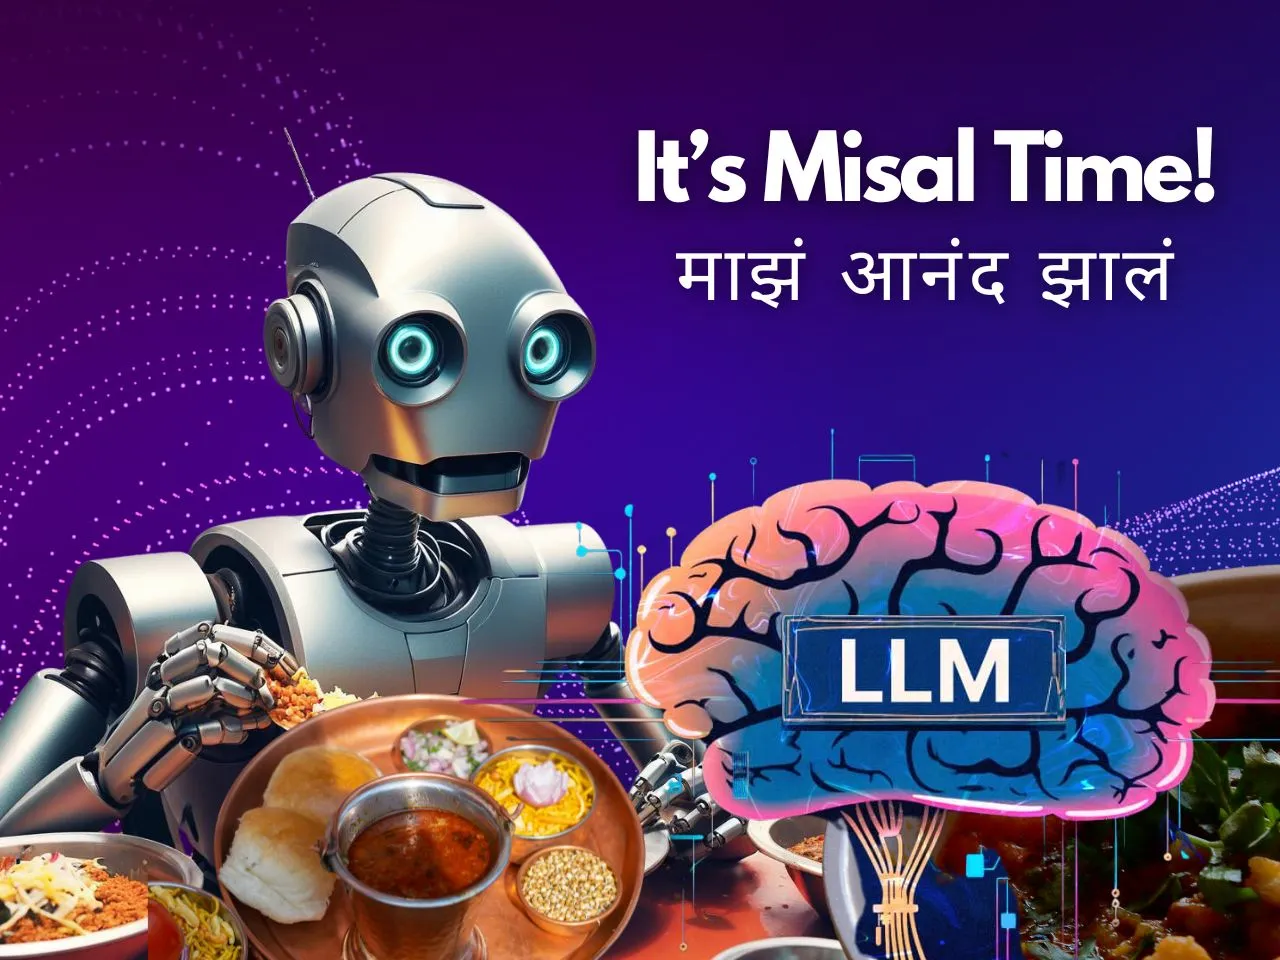 Misal Pav is Fine but Do You Know What an AI Startups Misal LLM is